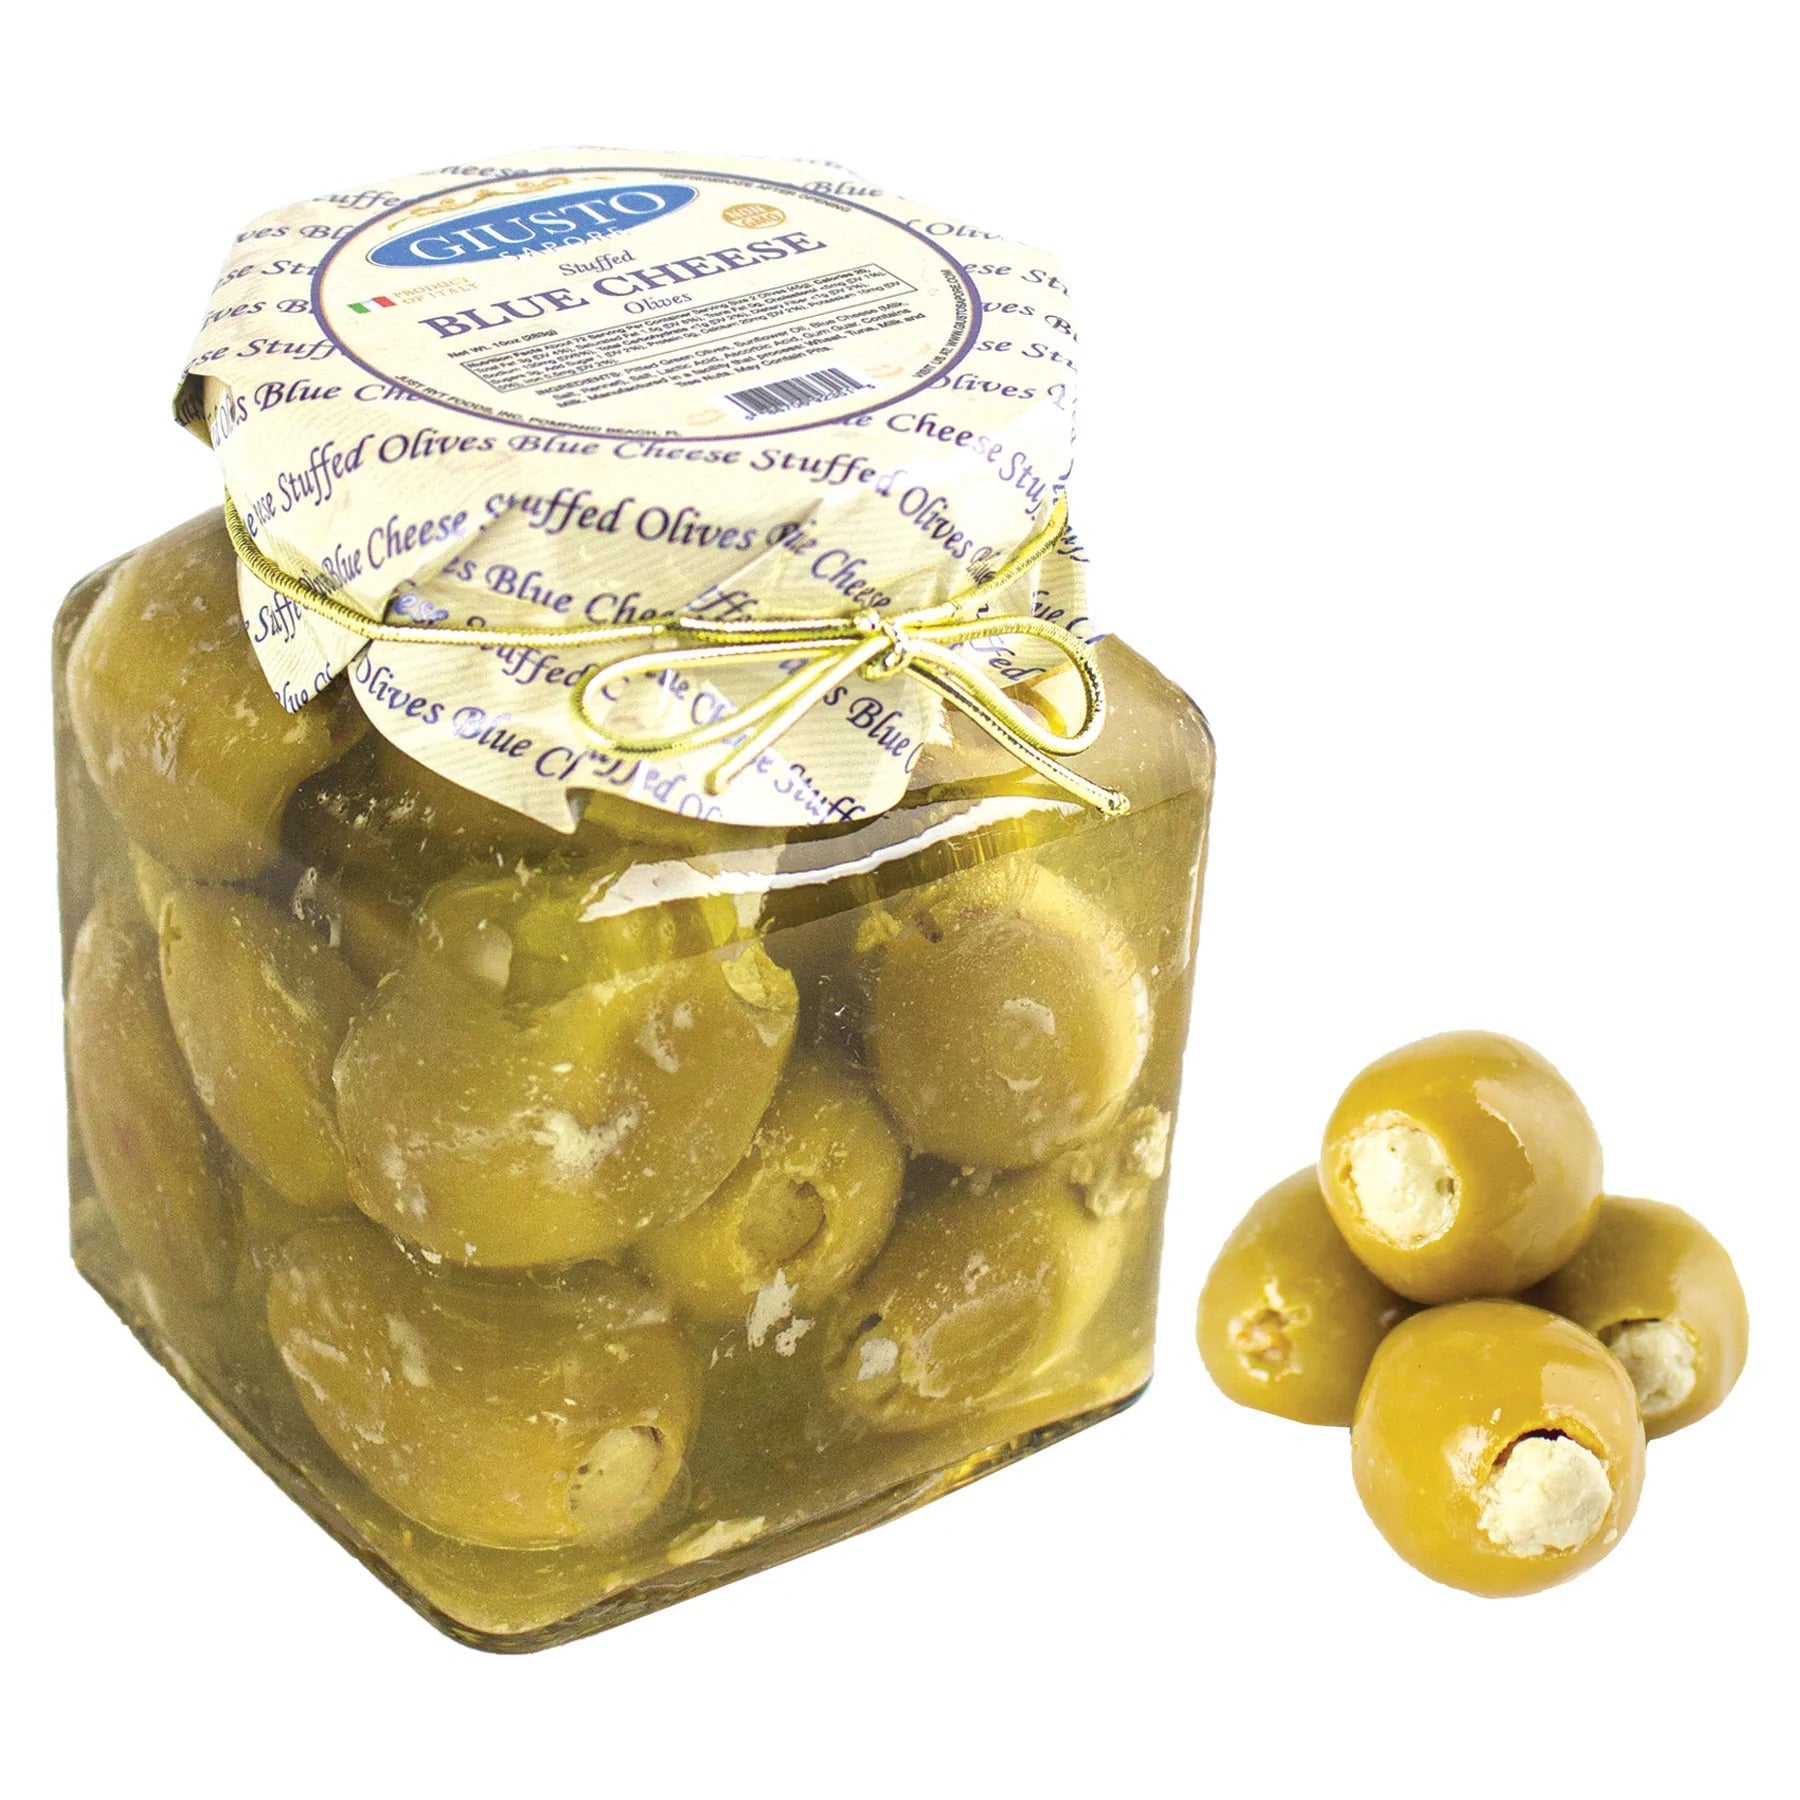 Giusto Sapore Olives Stuffed with Blue Cheese 10oz